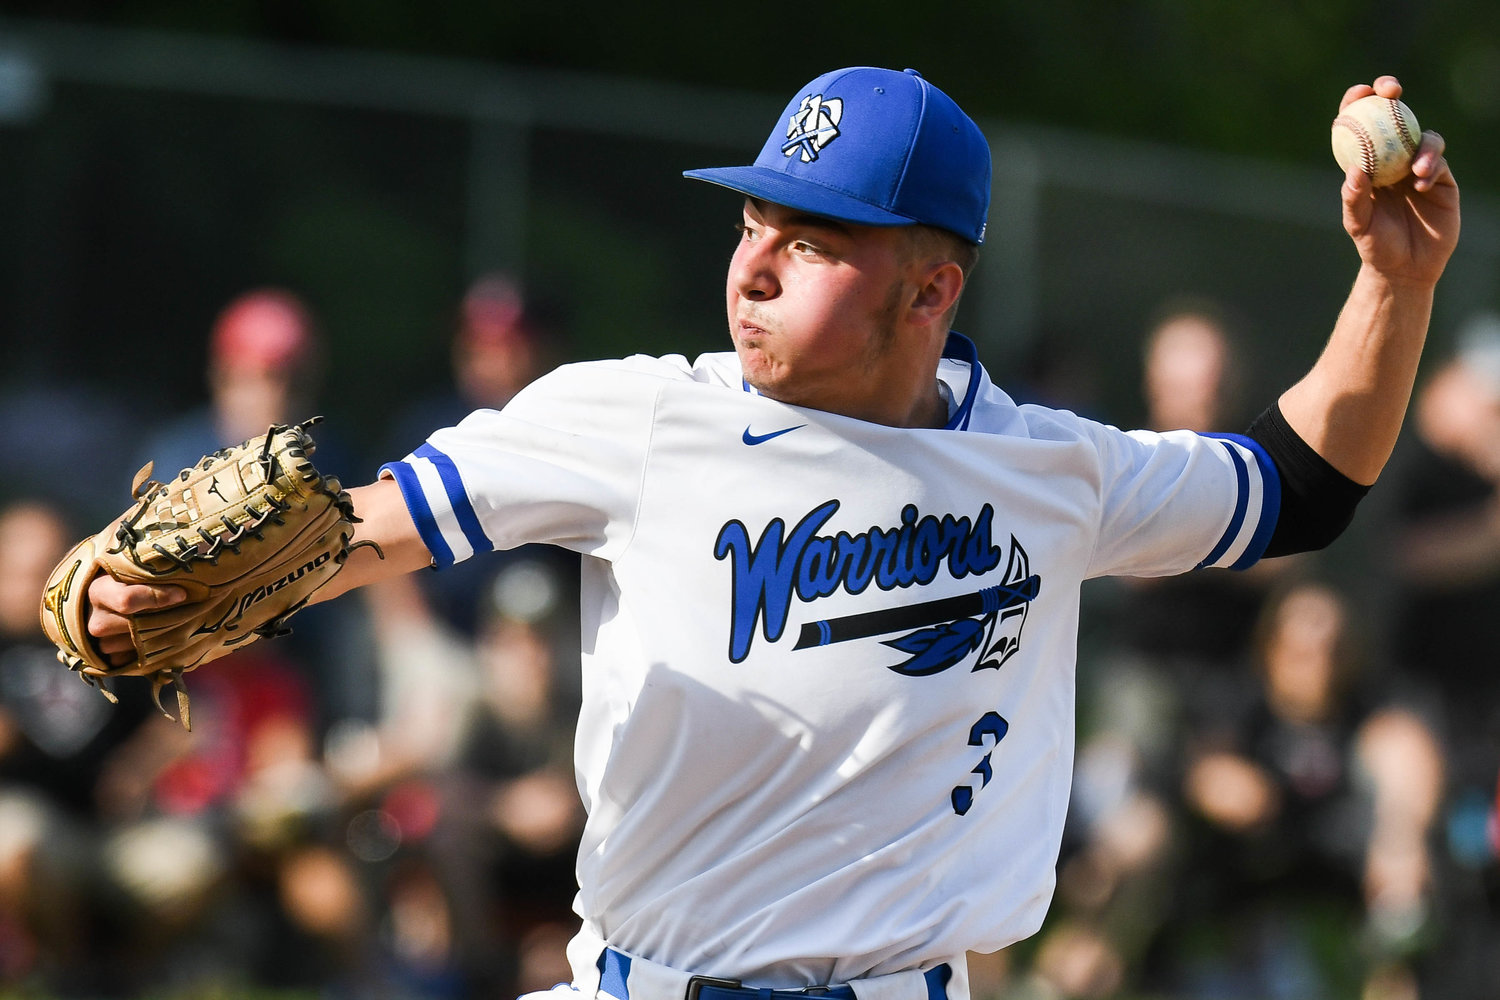 Whitesboro’s Colin Skermont was named the Tri-Valley League’s Colonial Division Pitcher of the Year. Skermont finished the season with a 7-0 record on the mound.